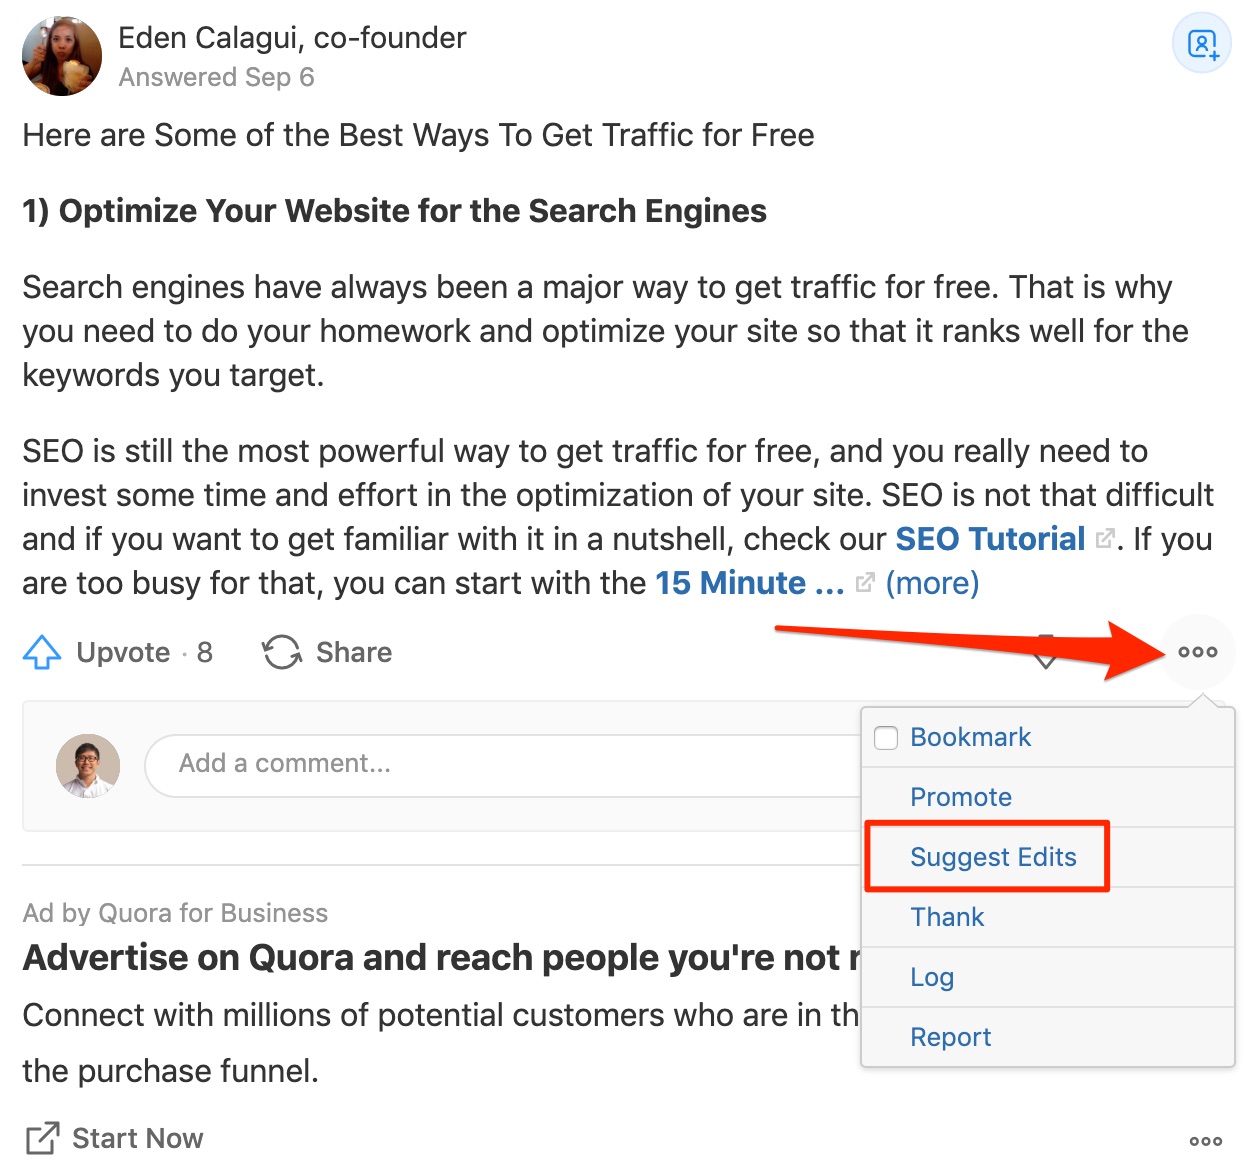 What are the best ways to get traffic Quora